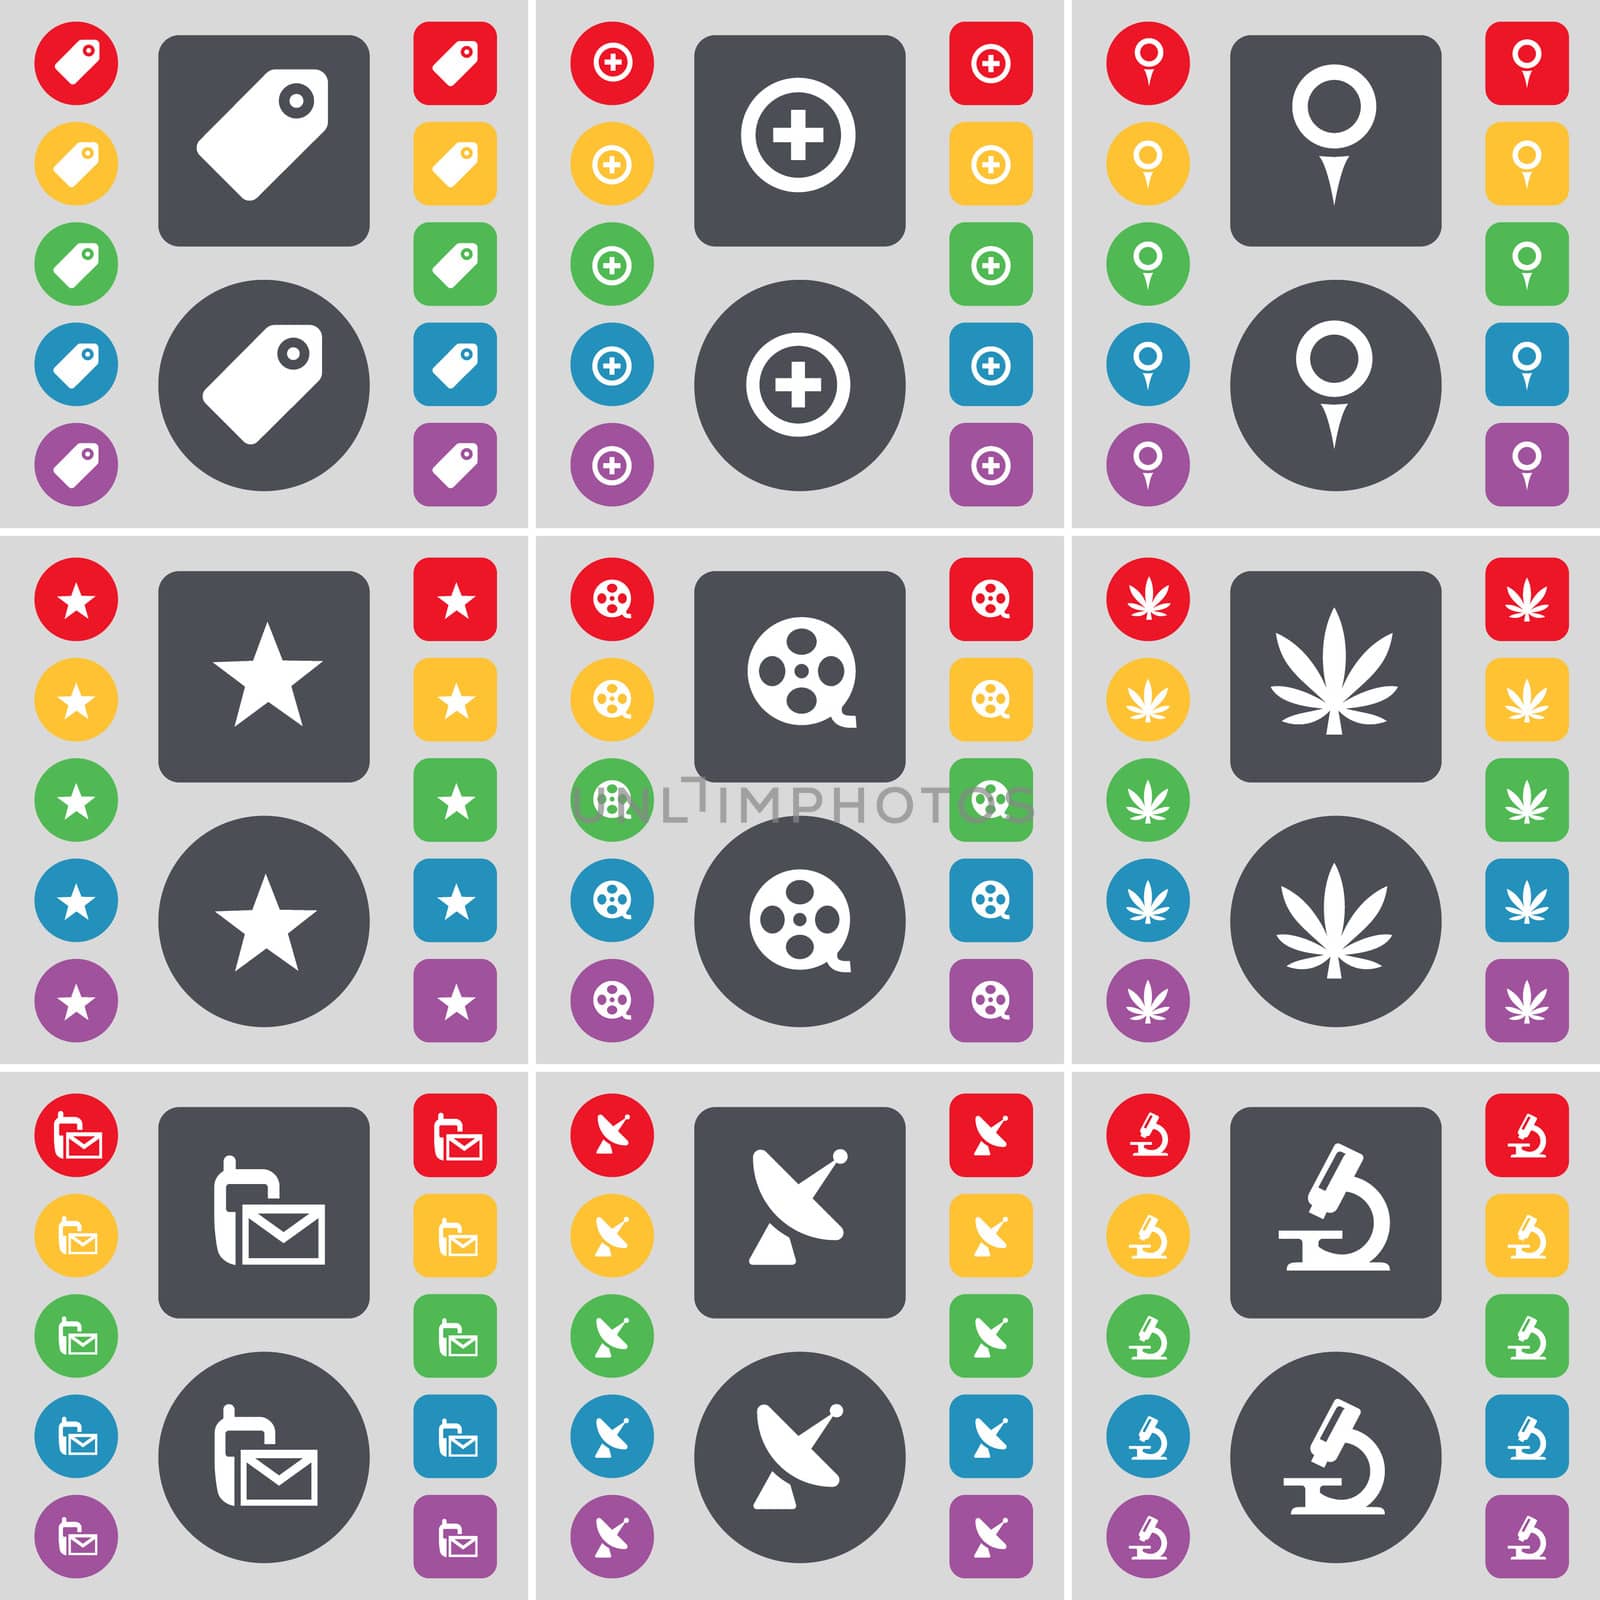 Tag, Plus, Checkpoint, Star, Videotape, Marijuana, SMS, Satellite dish, Microscope icon symbol. A large set of flat, colored buttons for your design. illustration